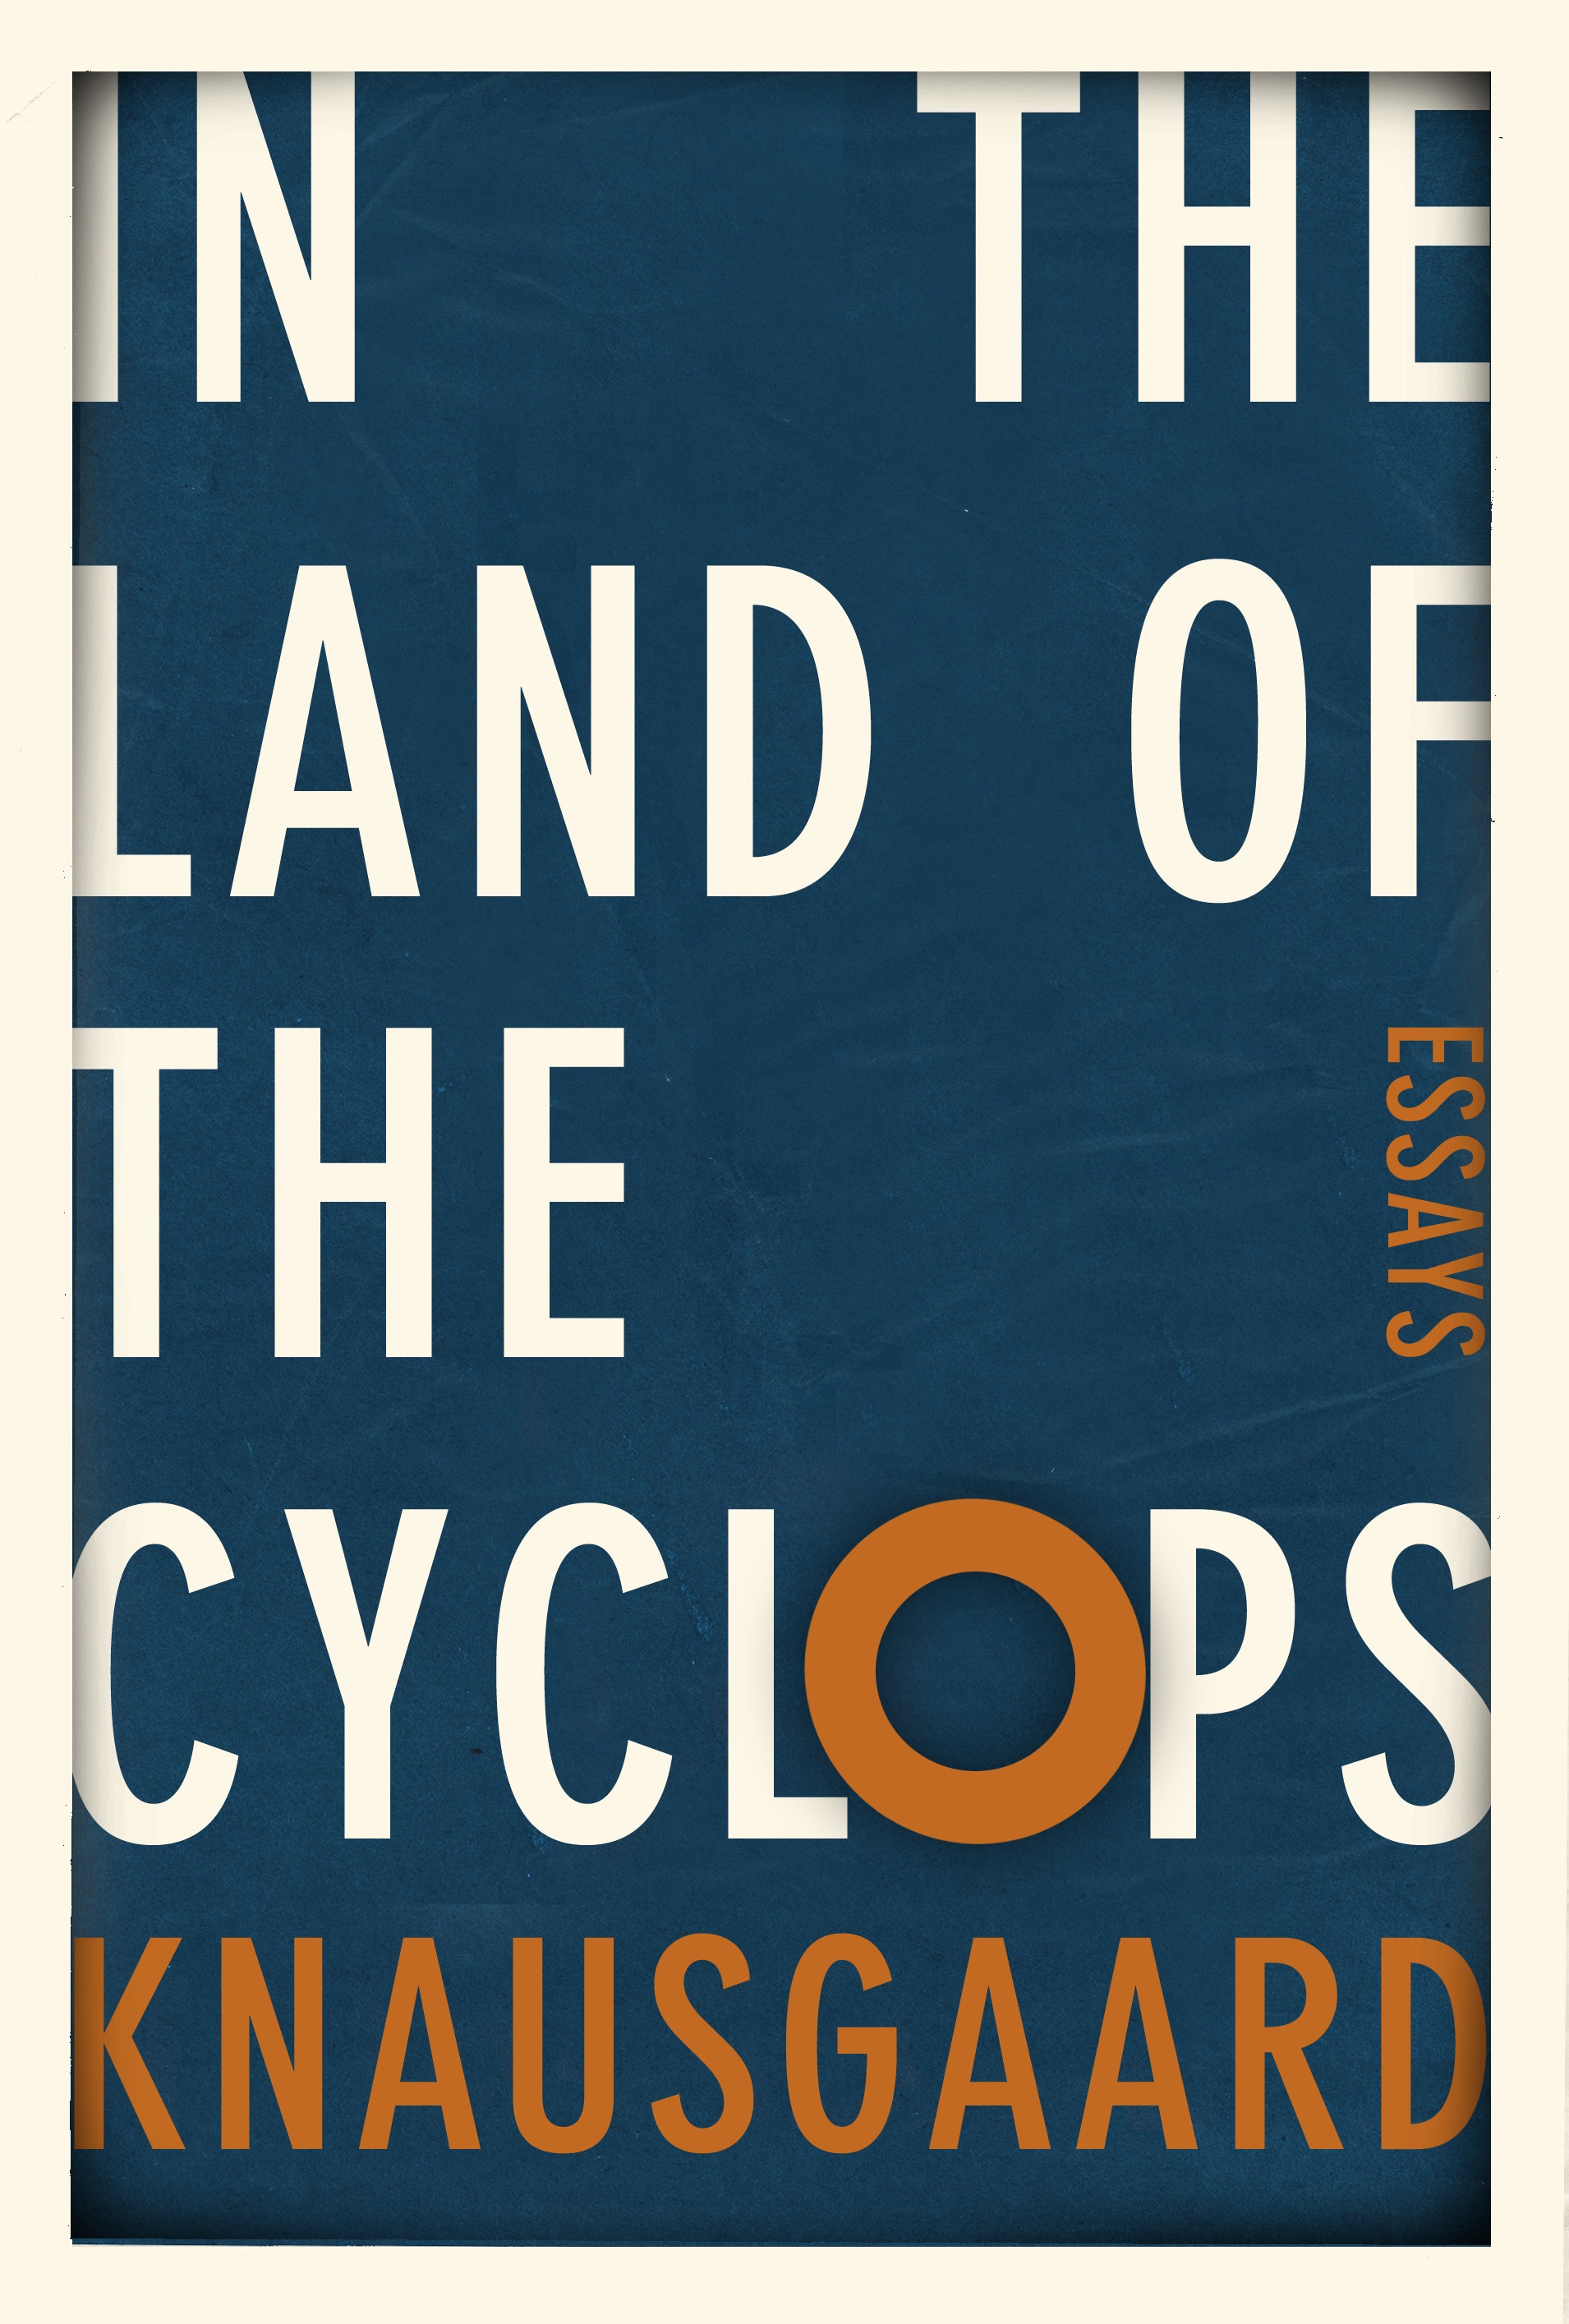 Book “In the Land of the Cyclops” by Karl Ove Knausgaard — January 7, 2021